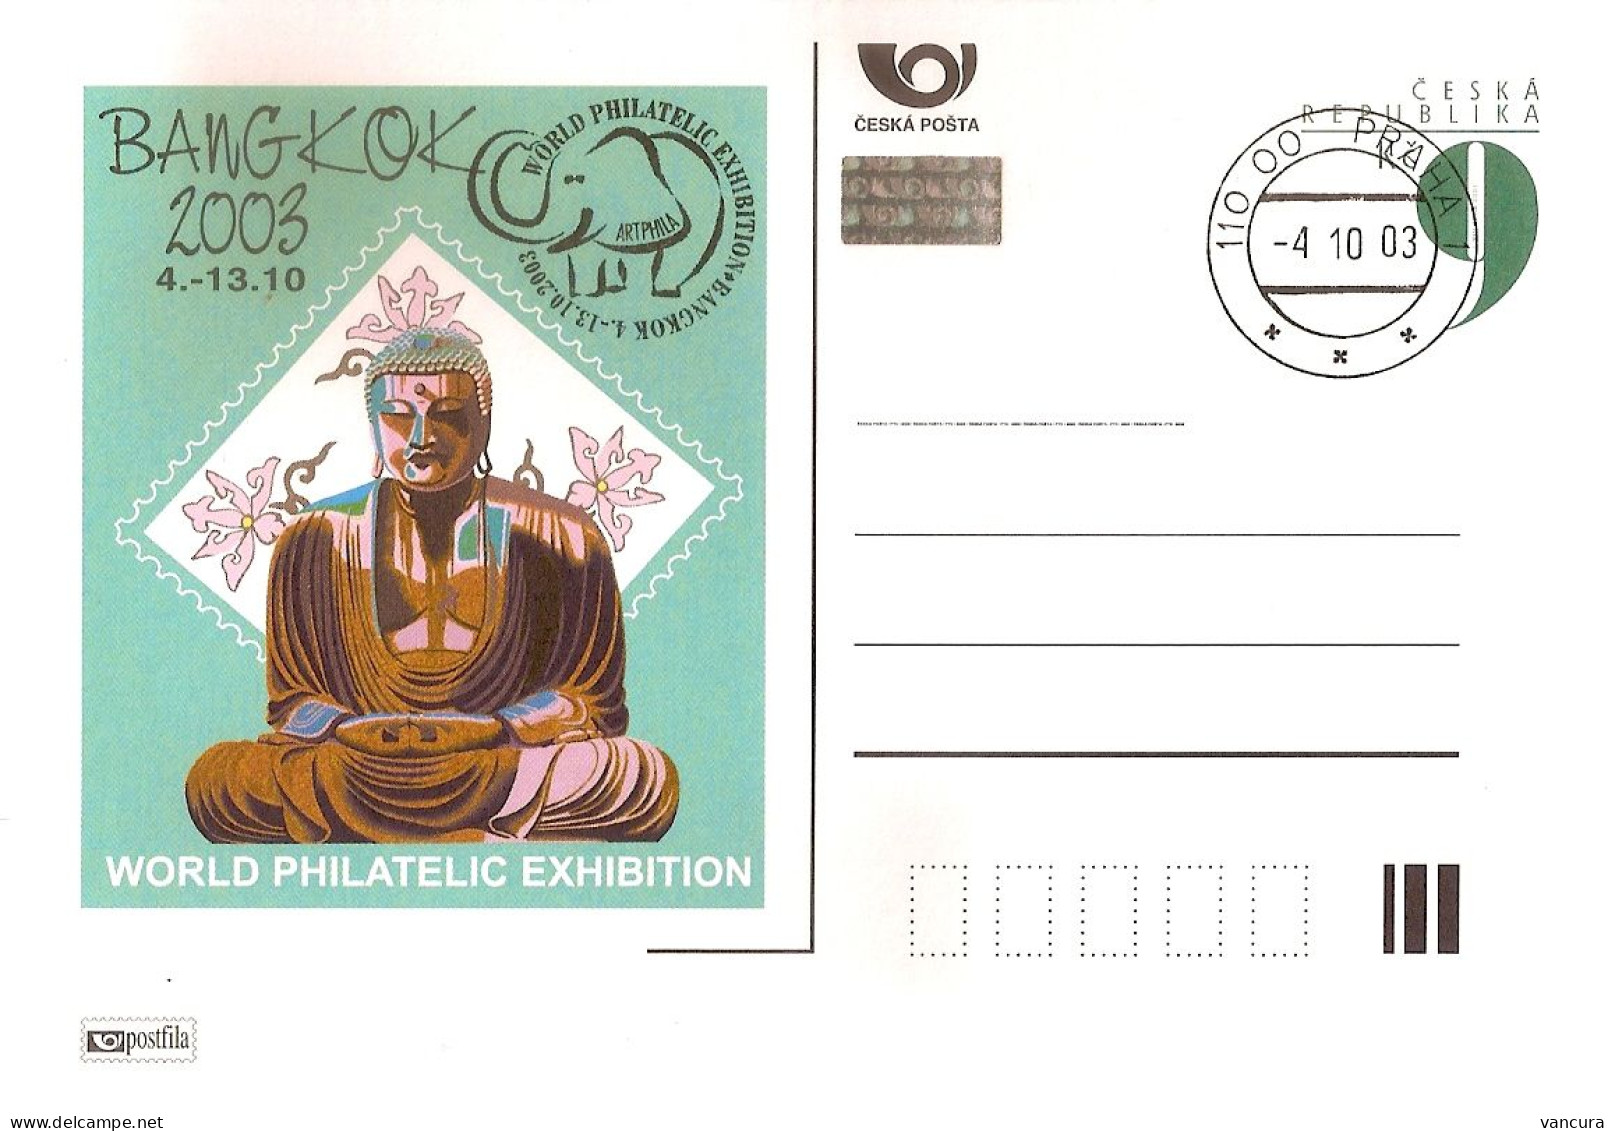 CDV A 92 Czech Republic Bangkog Stamp Exhibition Buddha 2003 The Scan Is Poor, But The Card Is OK! - Cartes Postales